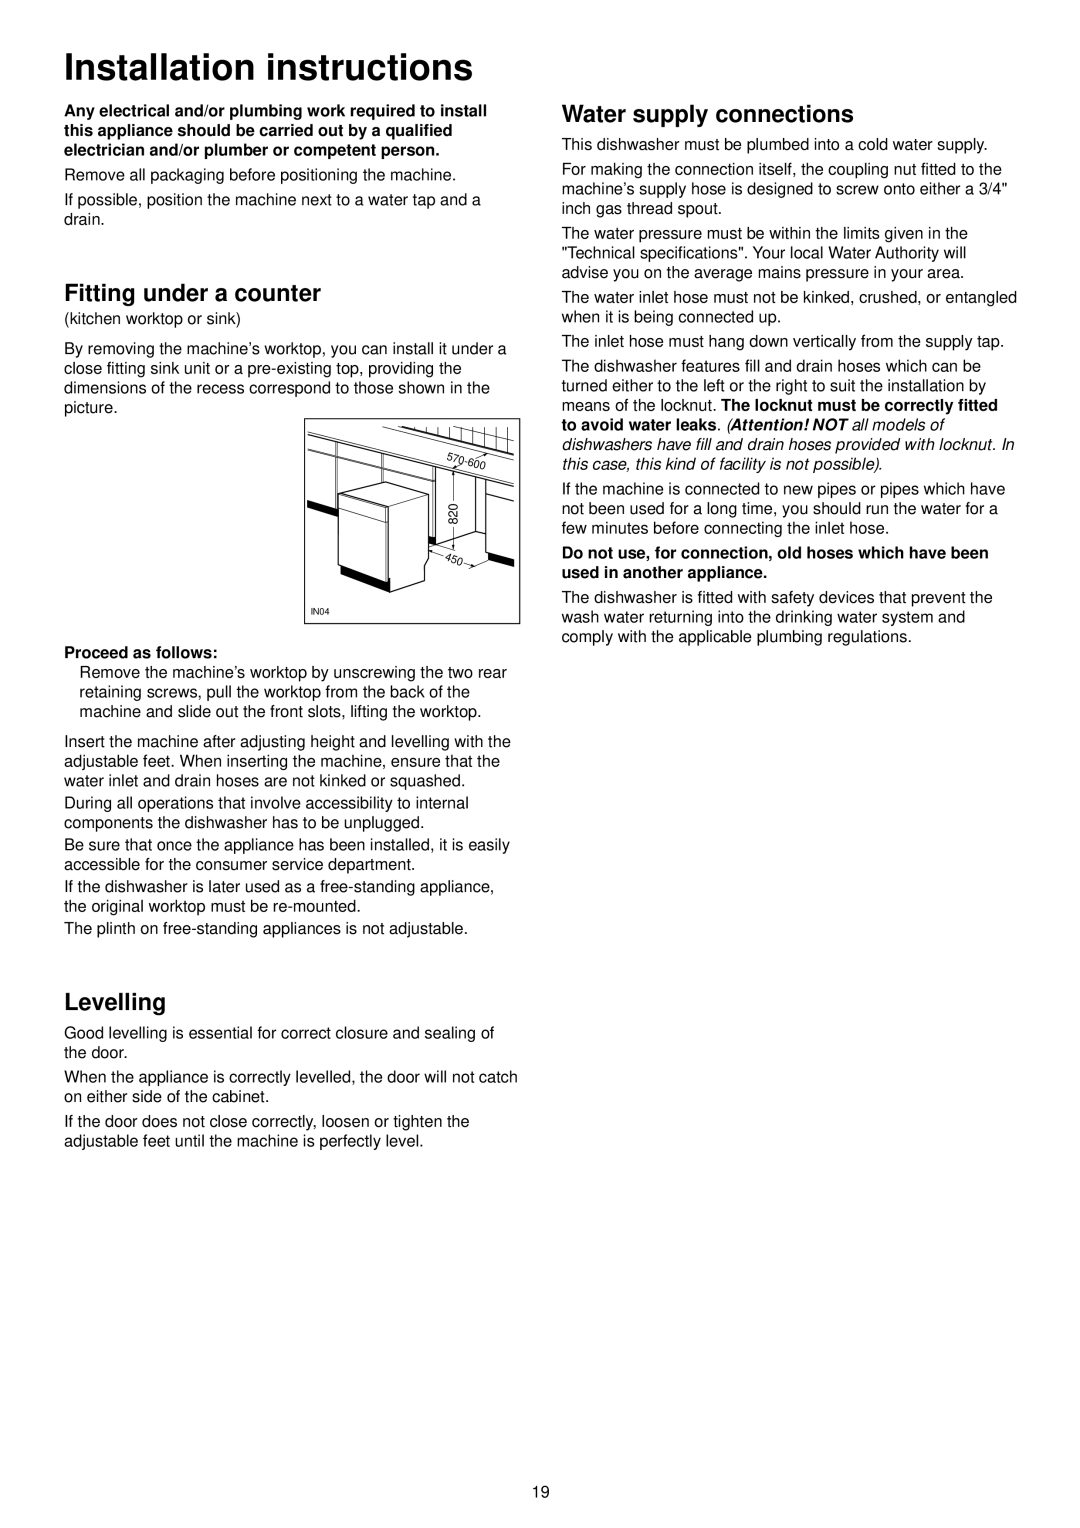 Zanussi ZSF 4123 S manual Installation instructions, Fitting under a counter, Levelling, Water supply connections 